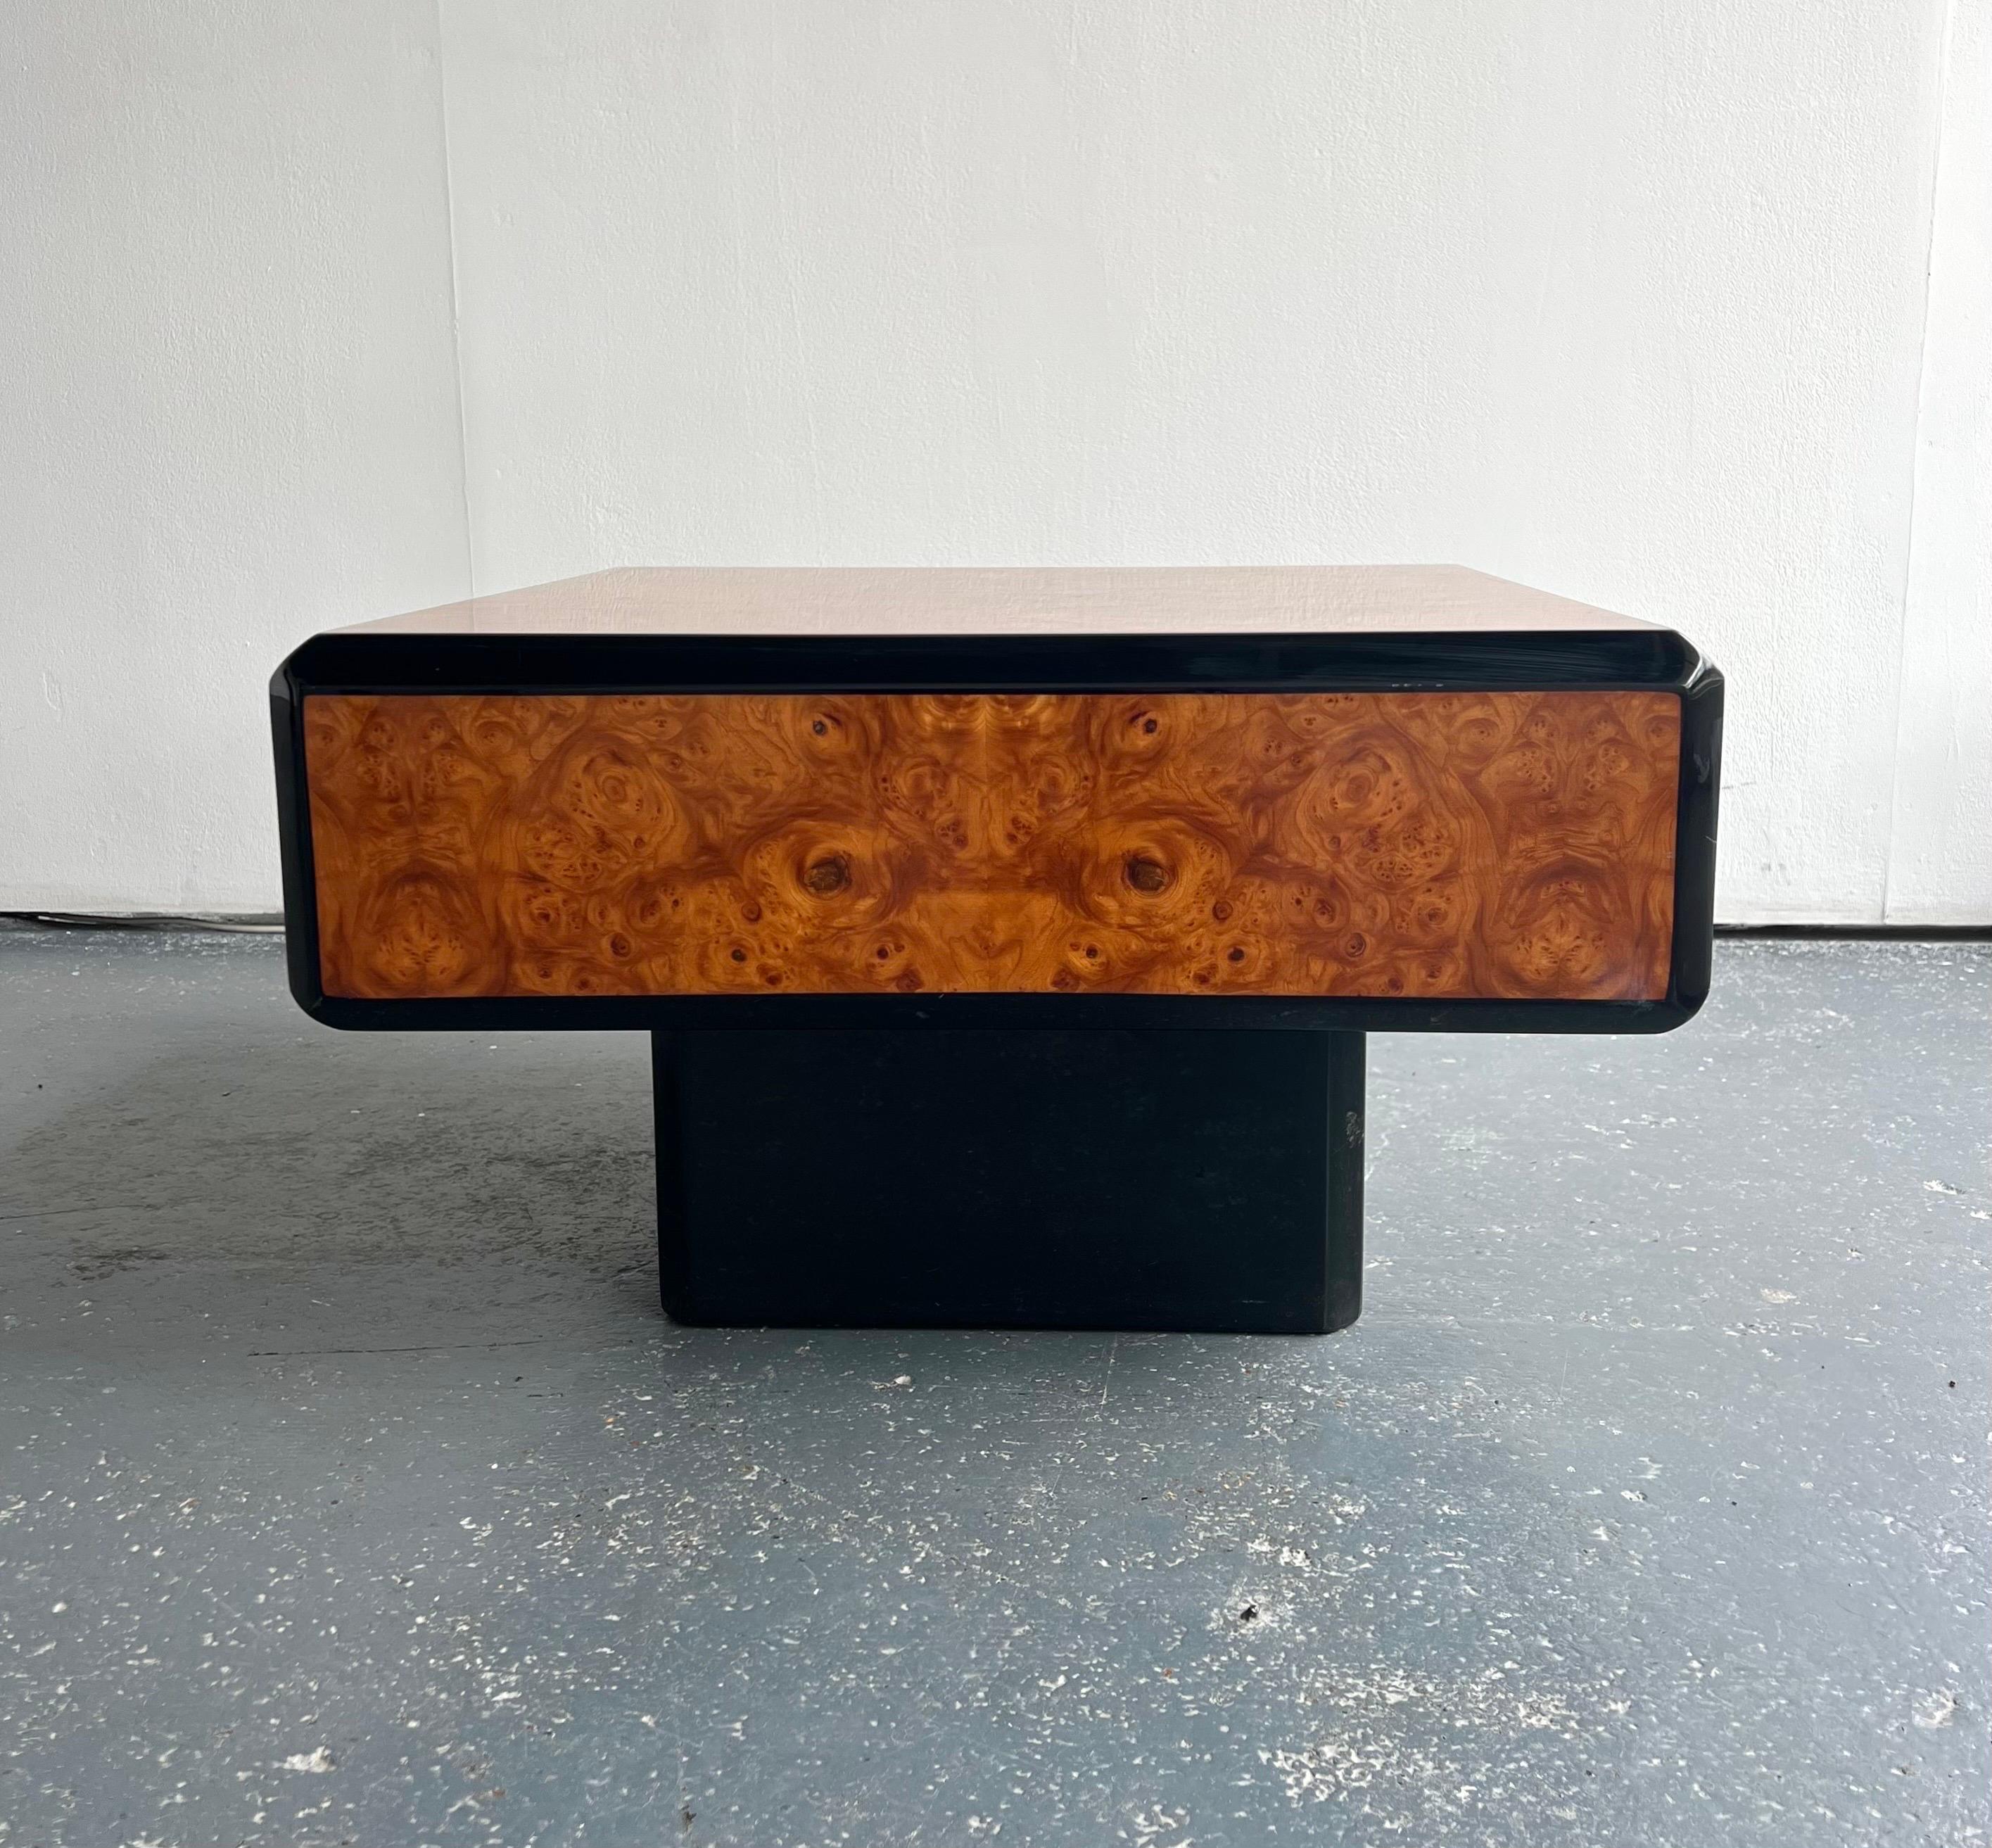 1980s Paul Michael Roche Bobois Style Coffee Table with burl wood and black lacquer.

A very chic small coffee table, perfect for a smaller living space made of burlwood with a lacquer finish. 

In very good condition, no obvious imperfections